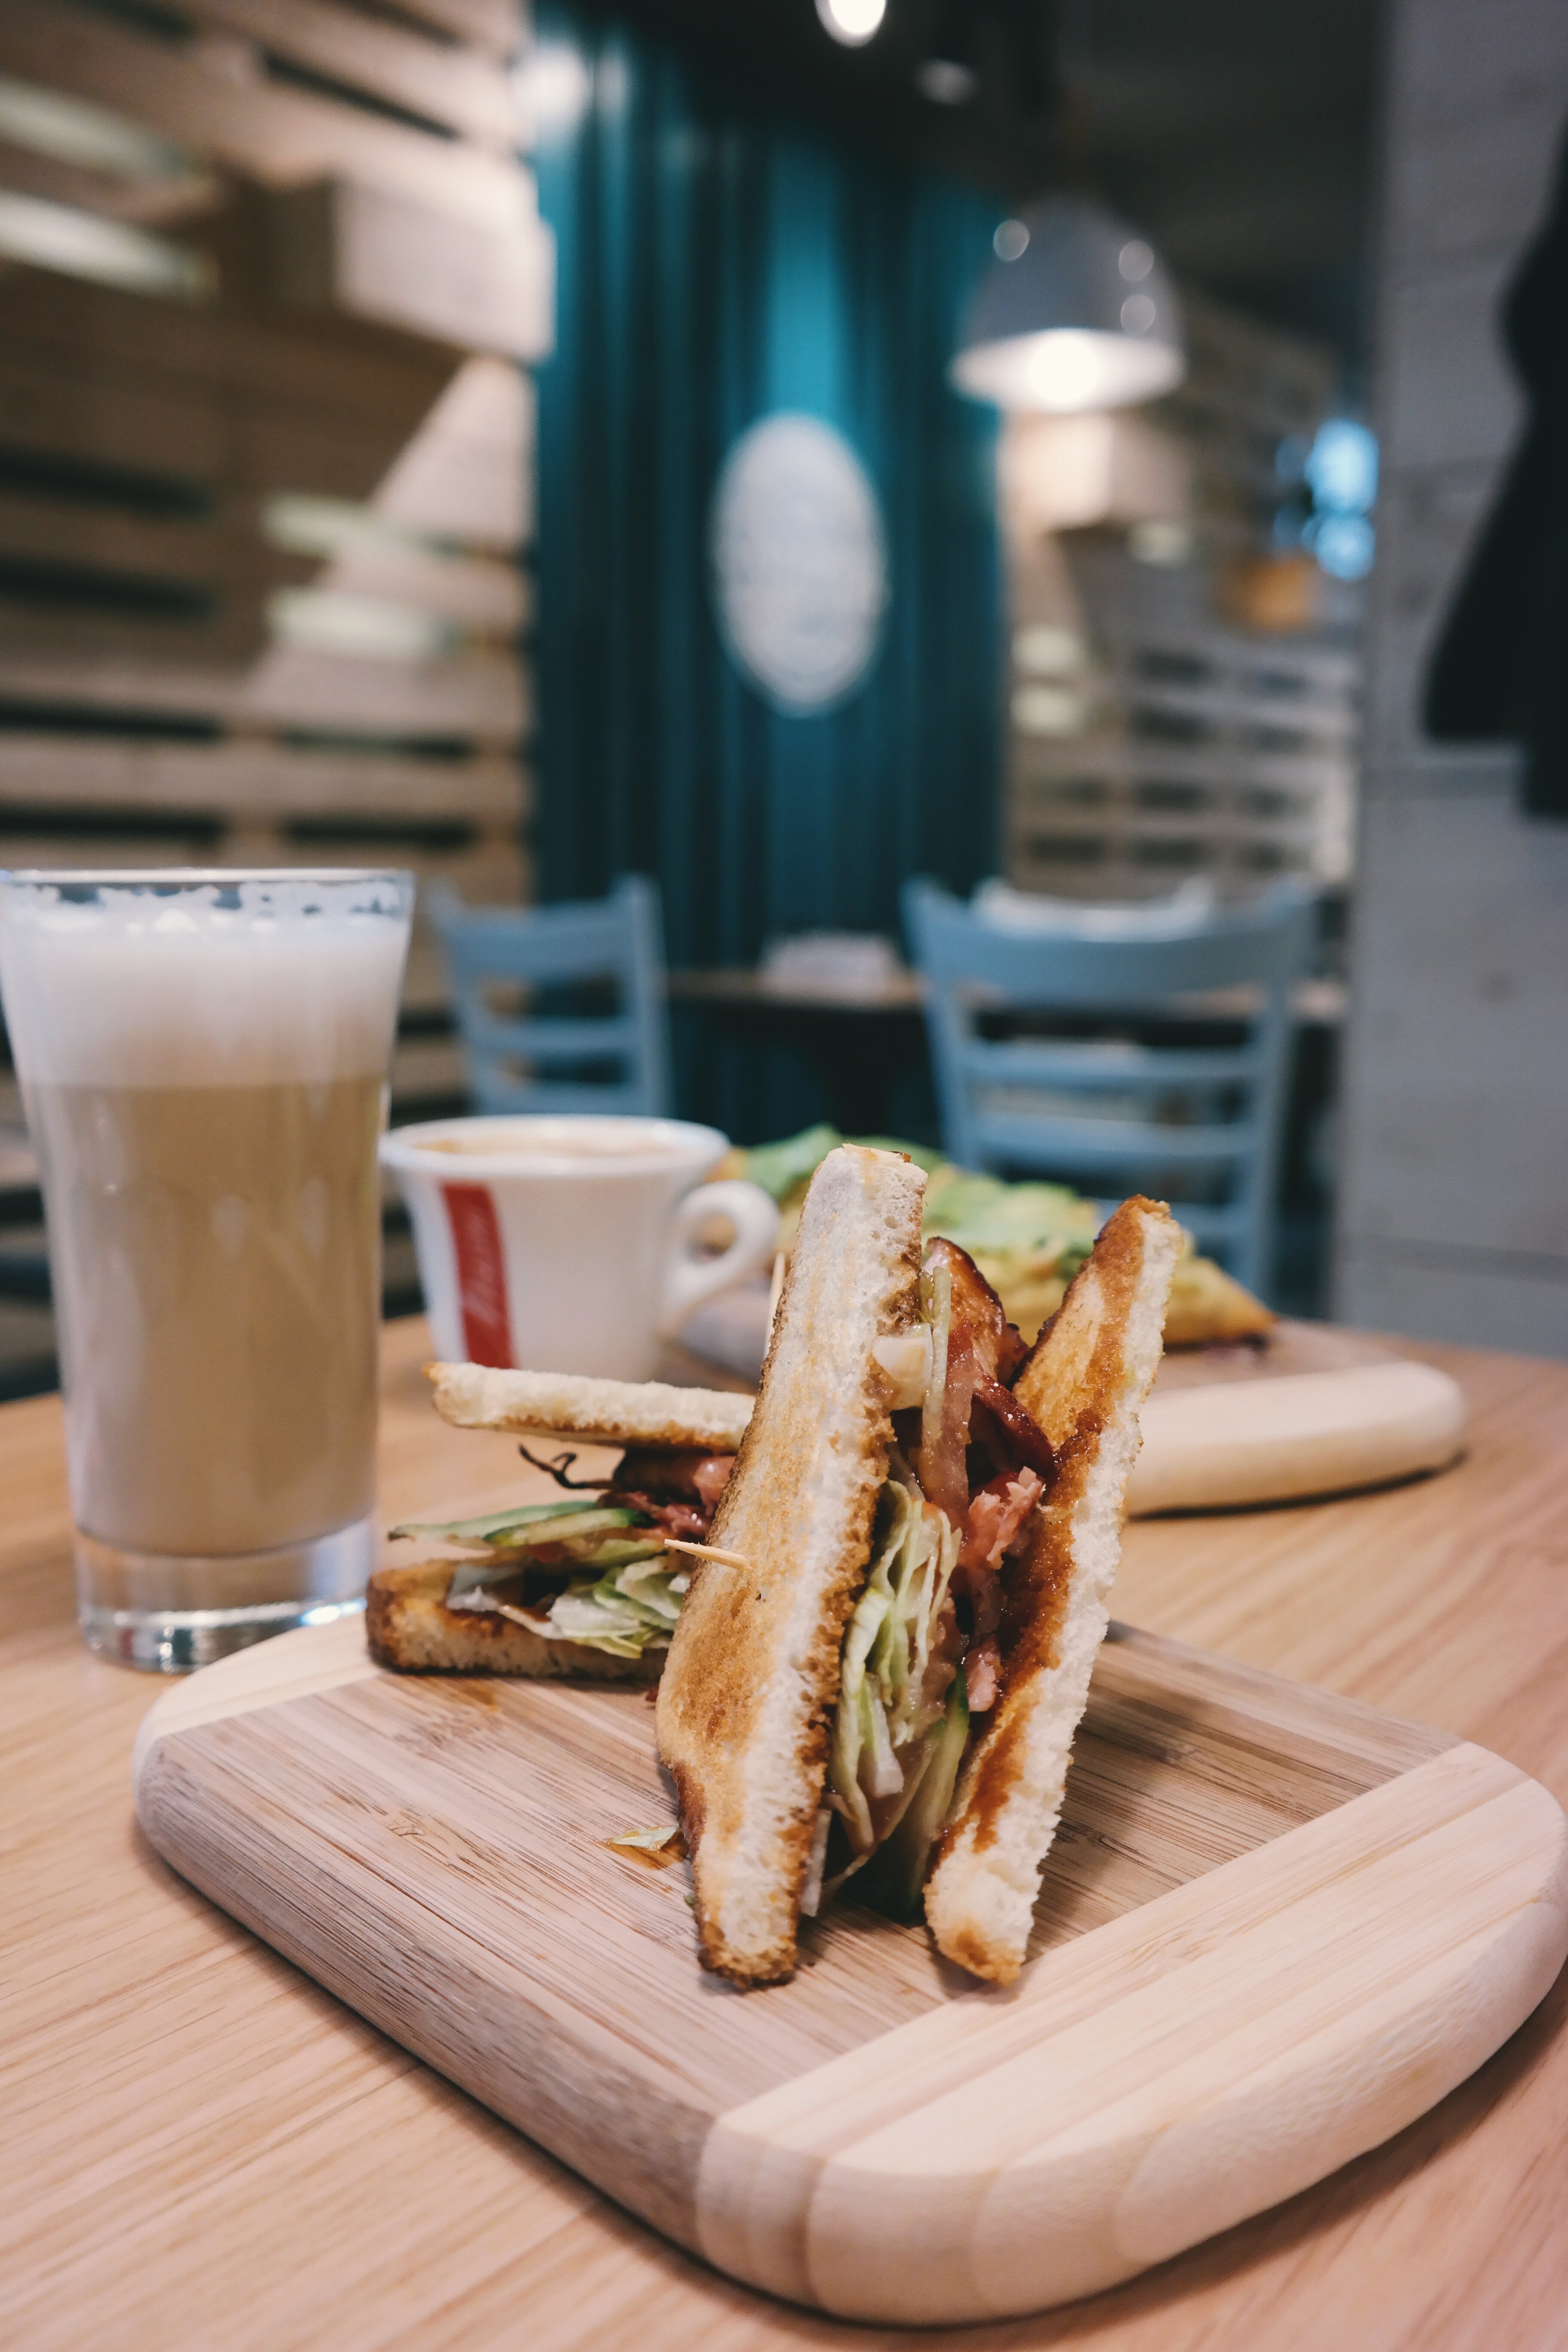 A drink and a couple of sandwiches on a dining table. | Photo: Pexels